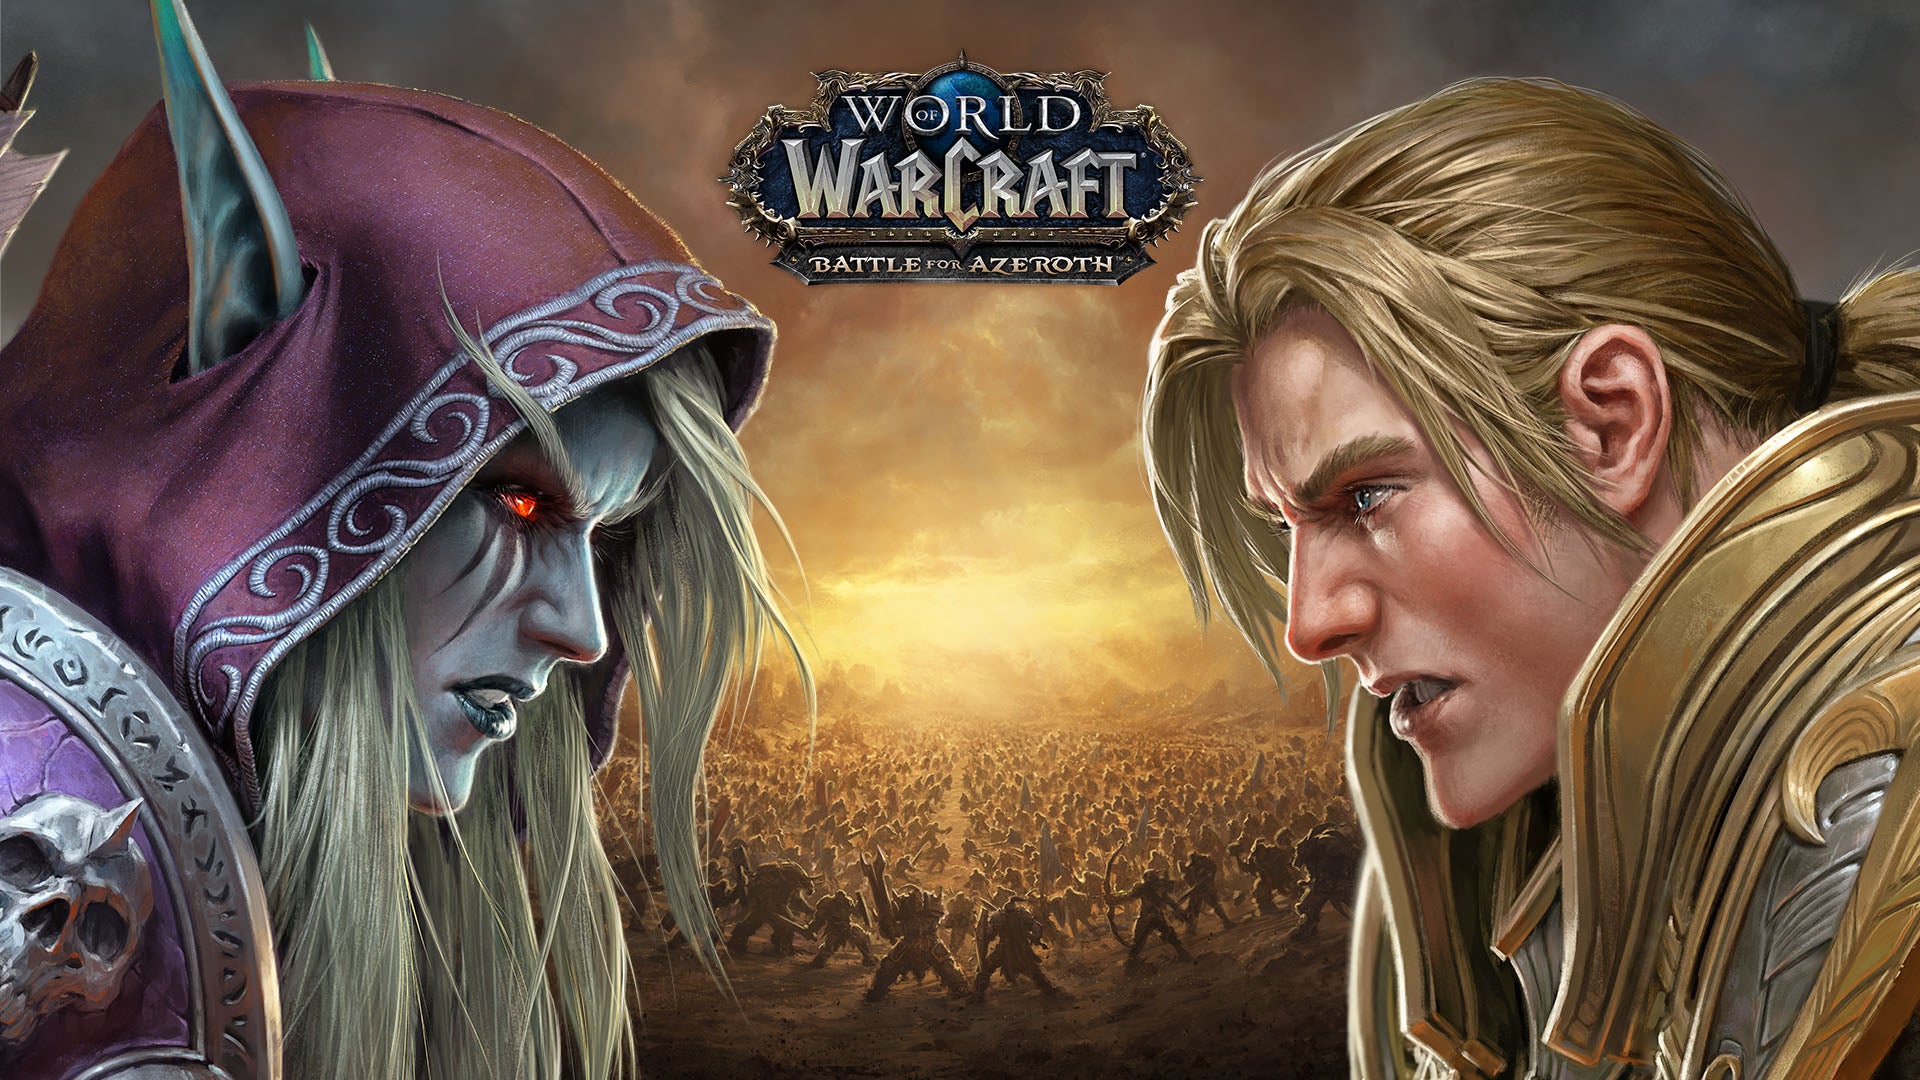 bloemblad tijger waterbestendig World of Warcraft: Battle for Azeroth Review | Trusted Reviews